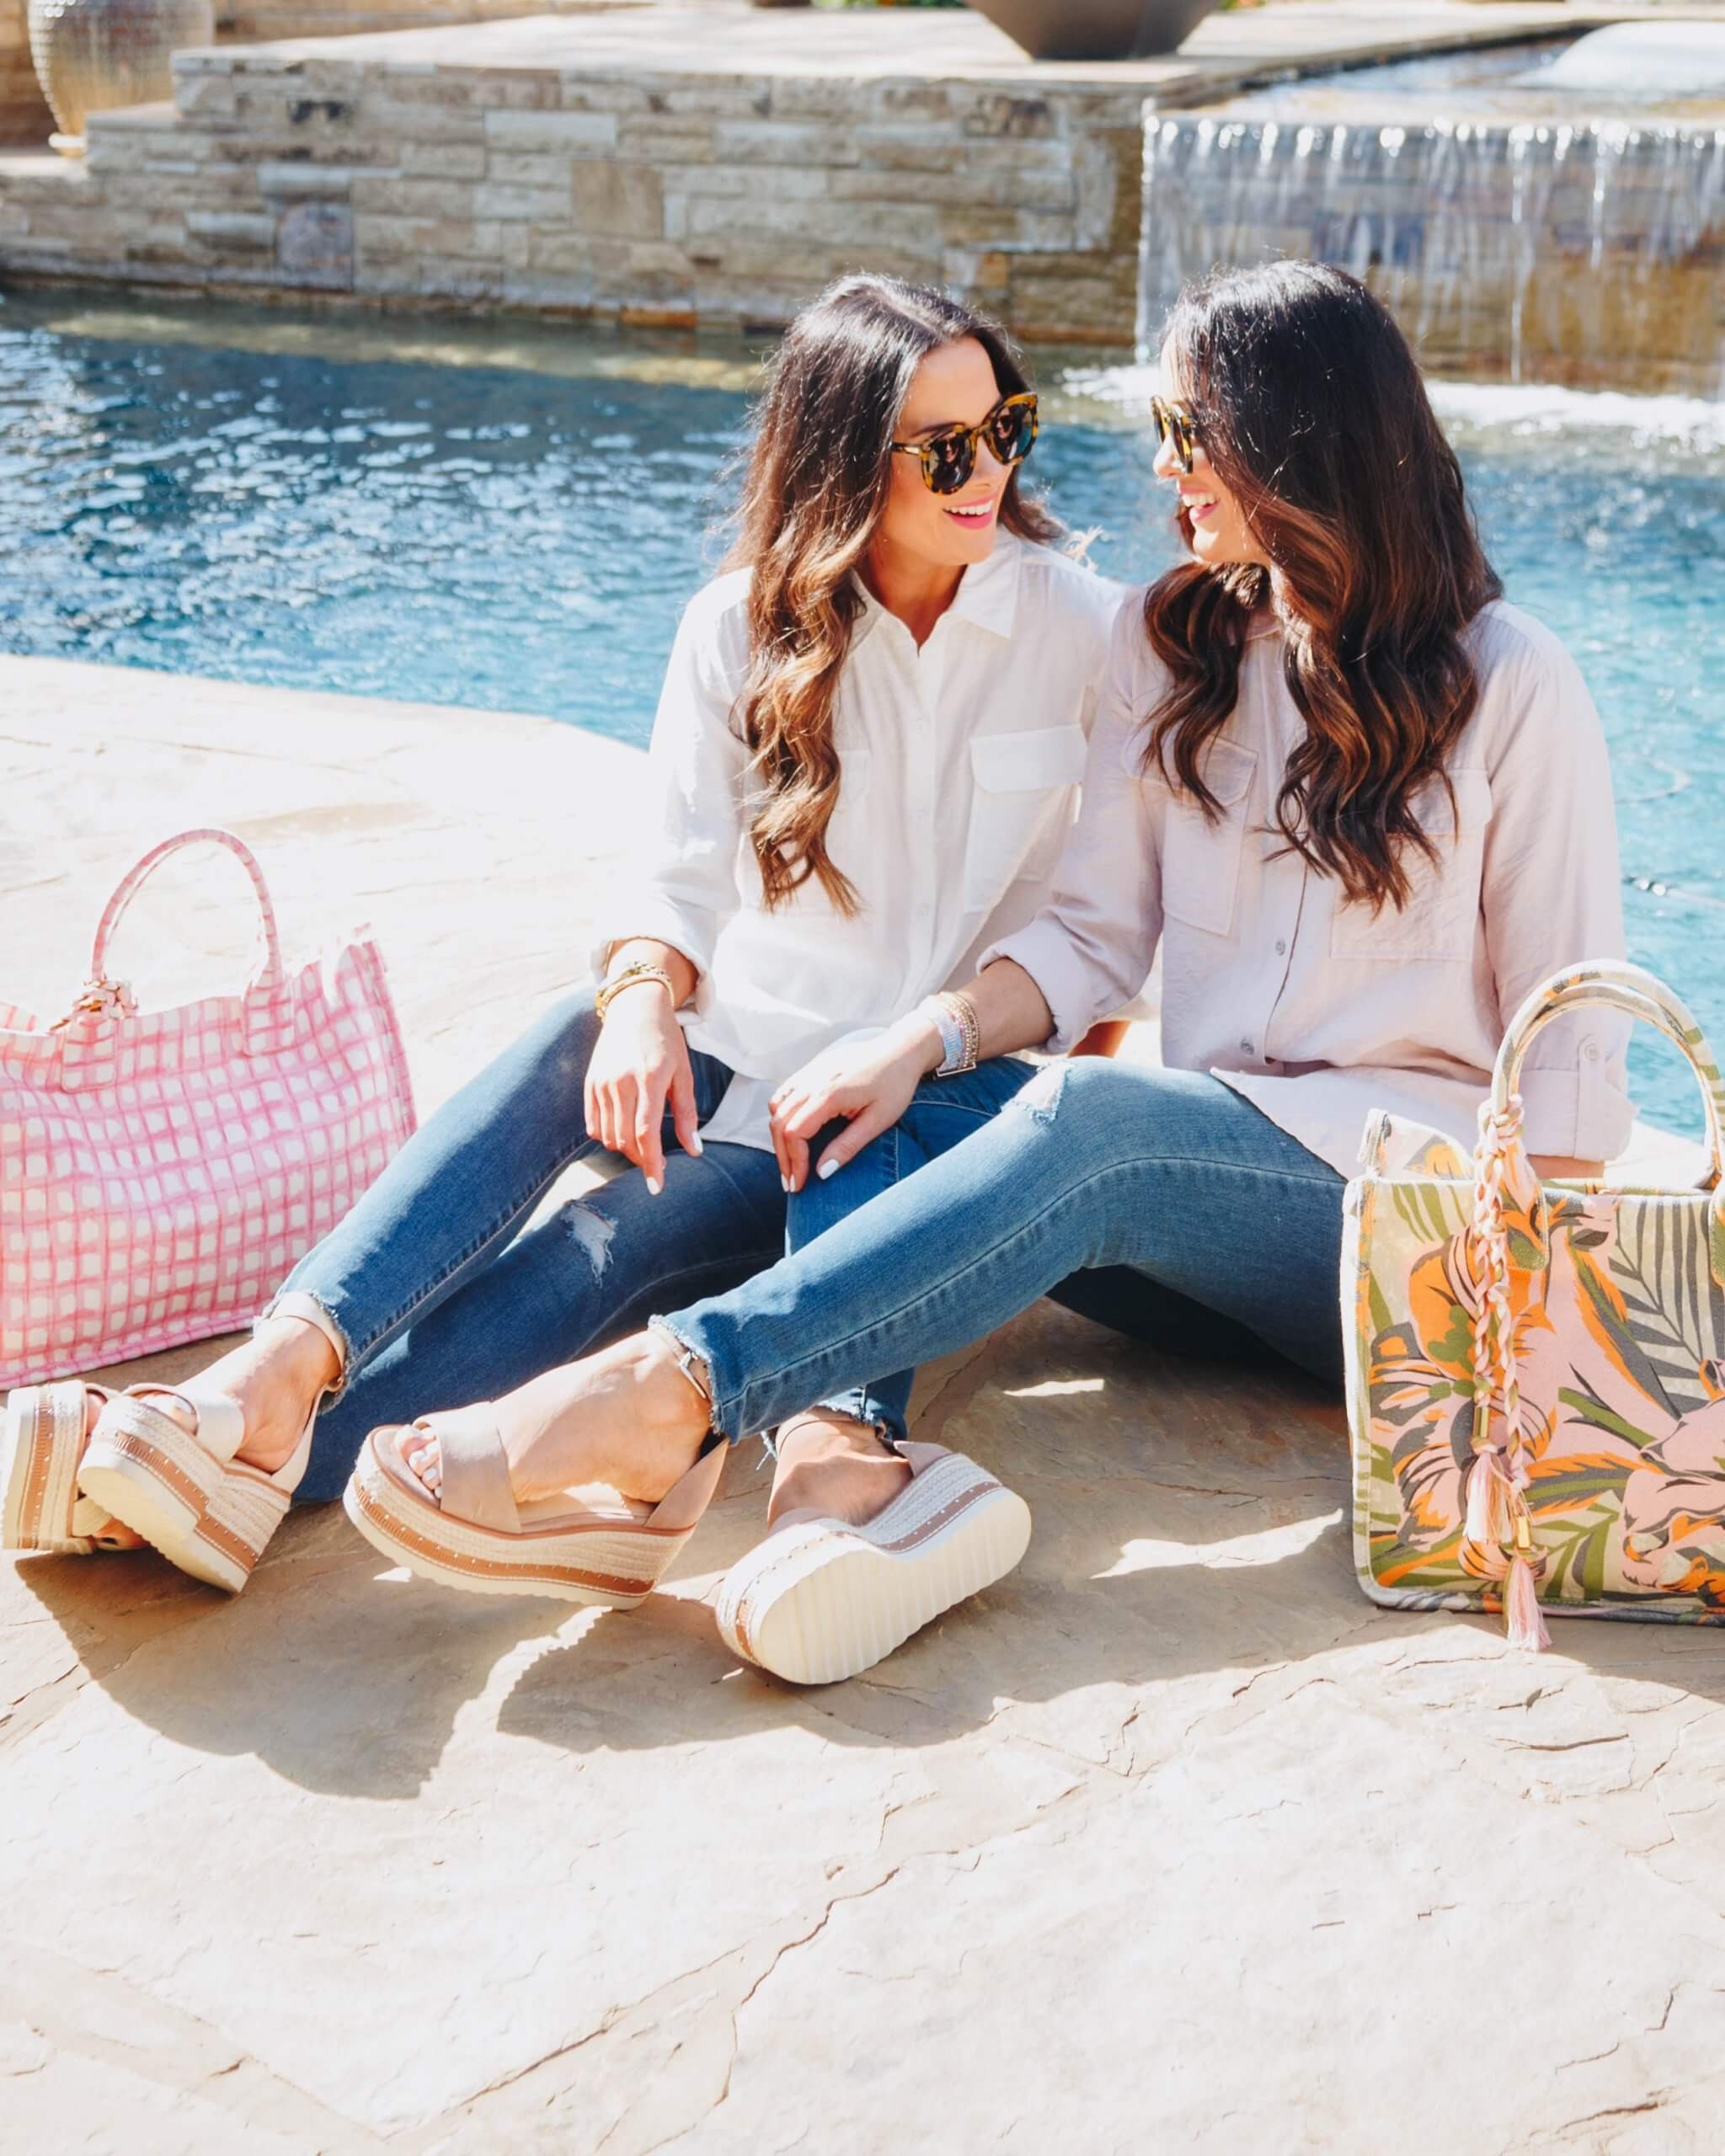 Shop Vince Camuto's New Spring Shoe Collection